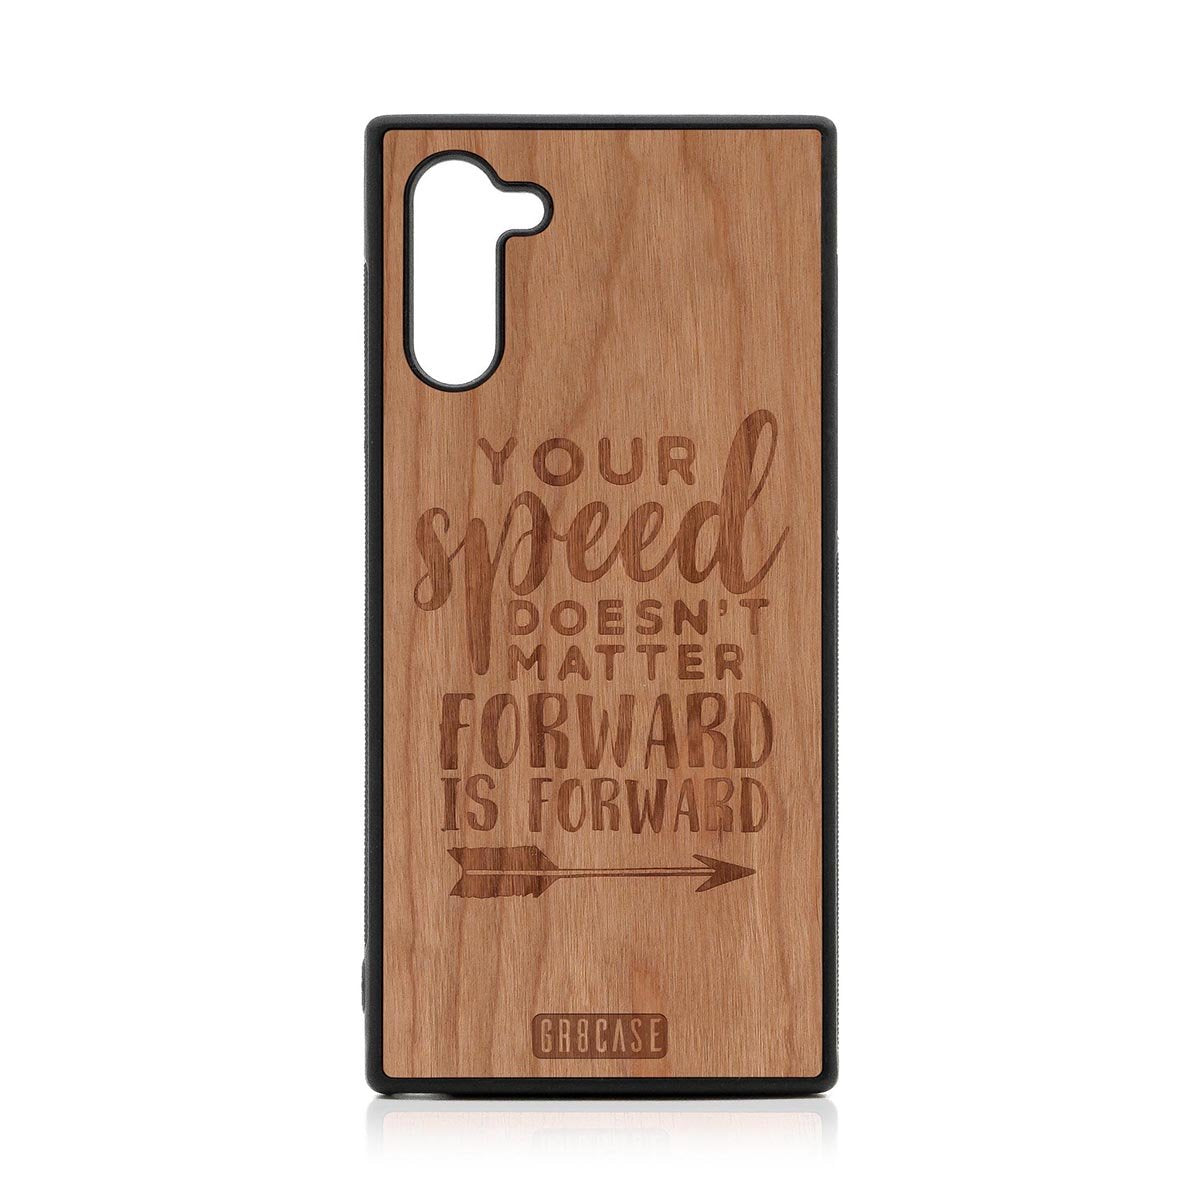 Your Speed Doesn't Matter Forward Is Forward Design Wood Case Samsung Galaxy Note 10